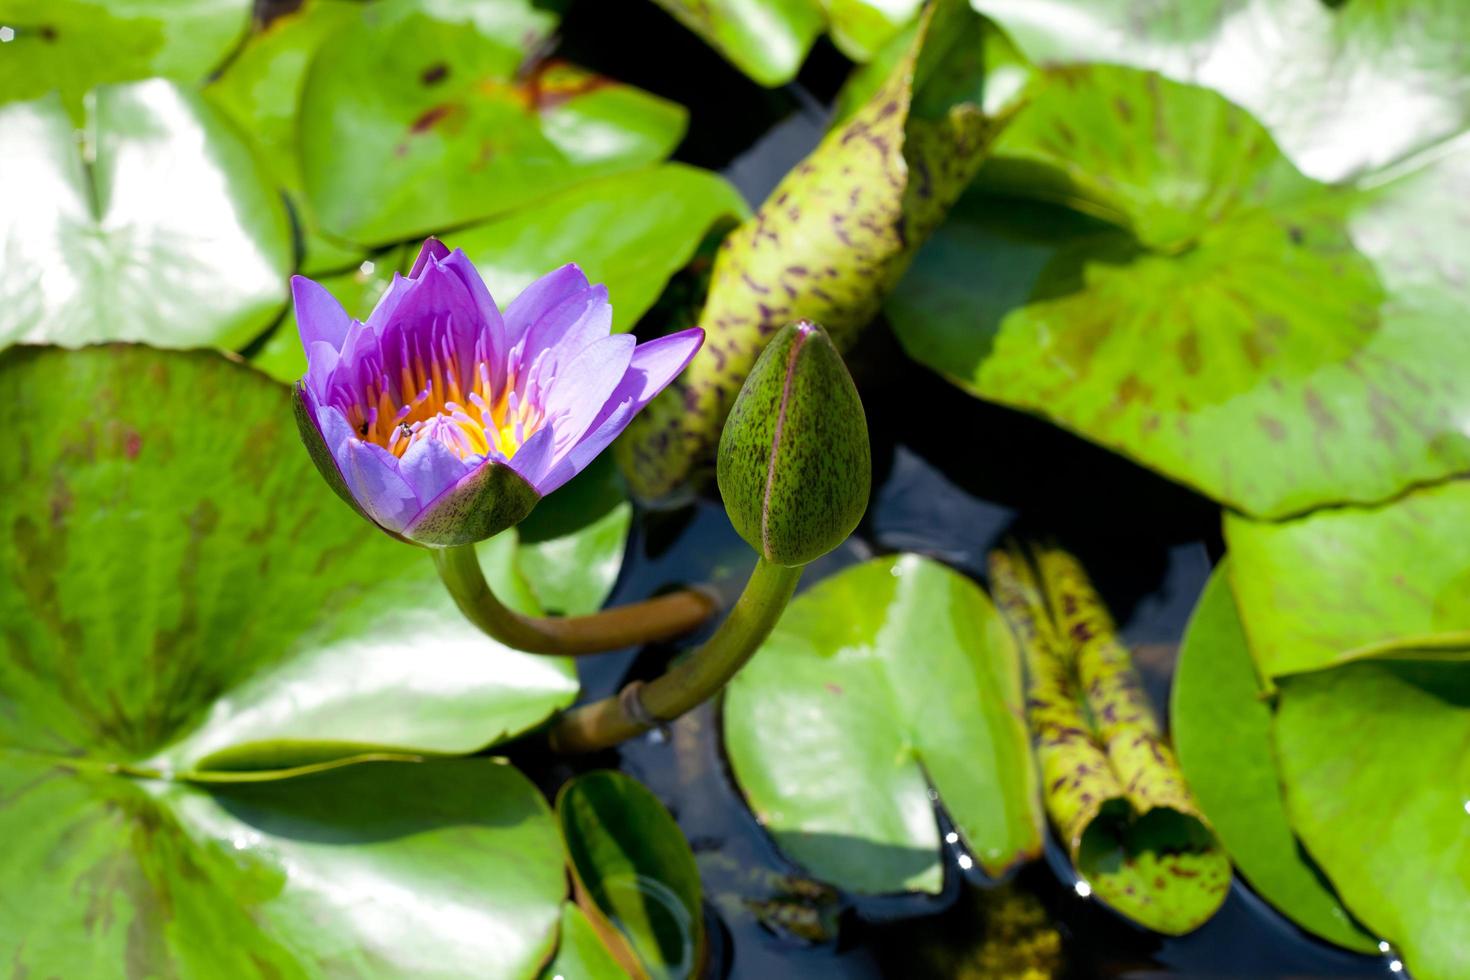 The purple lotus in the pond photo